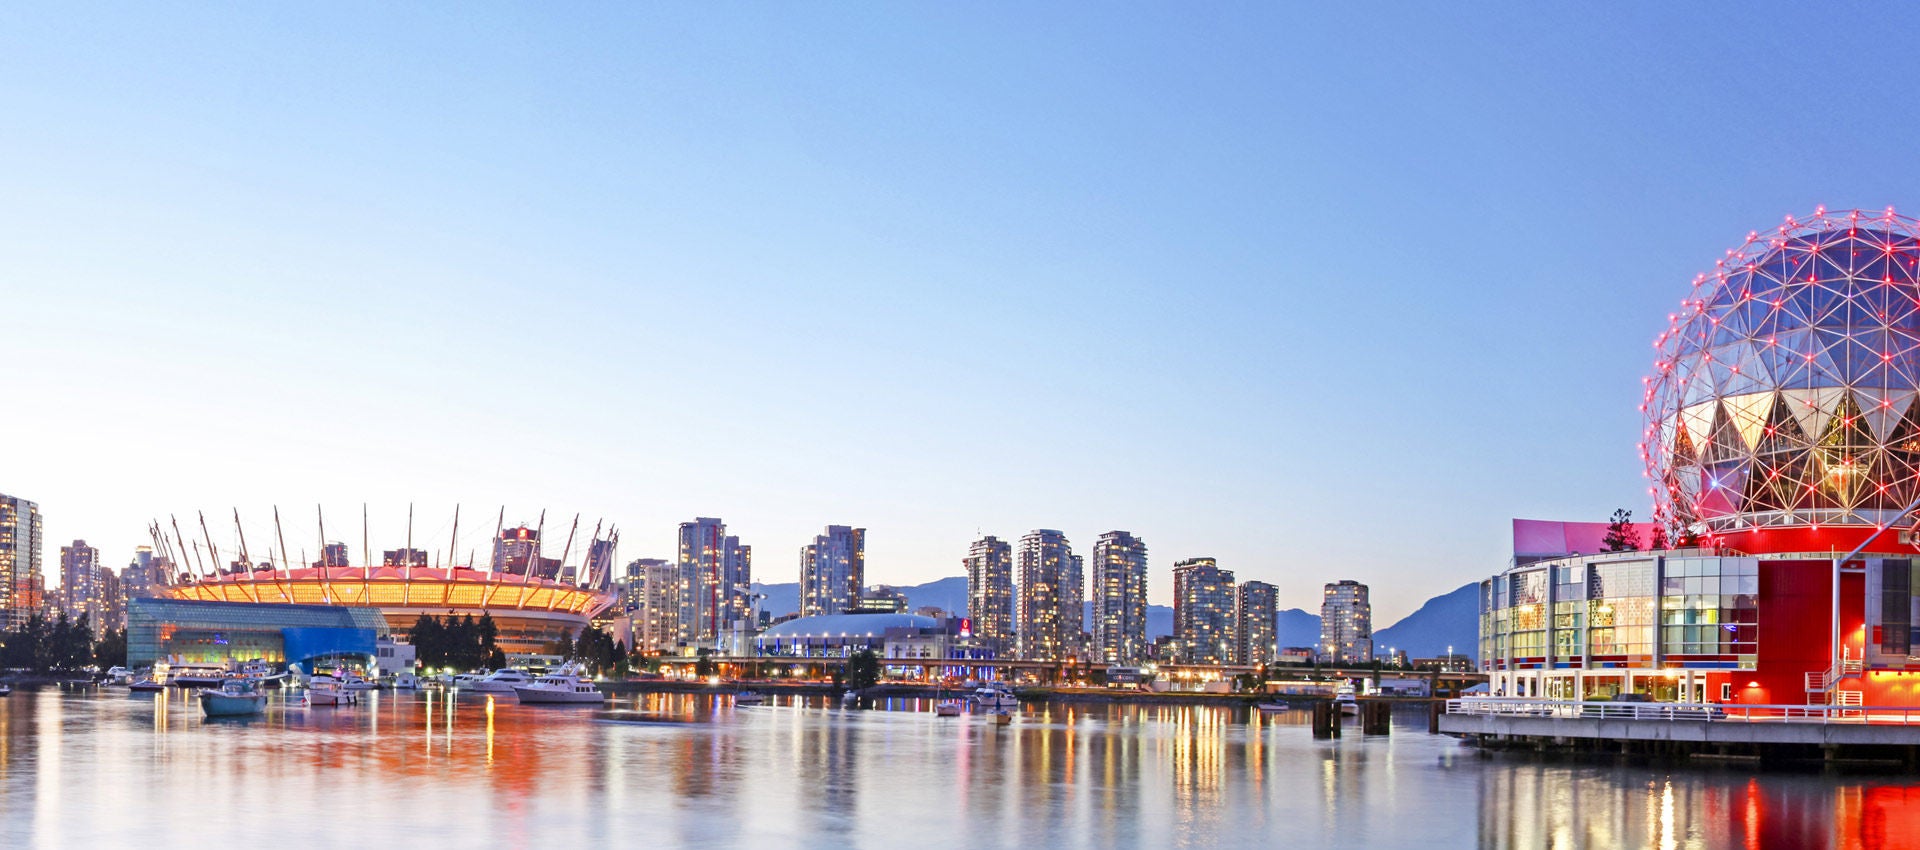 The lights of Vancouver fill the horizon as the sunsets on the city.